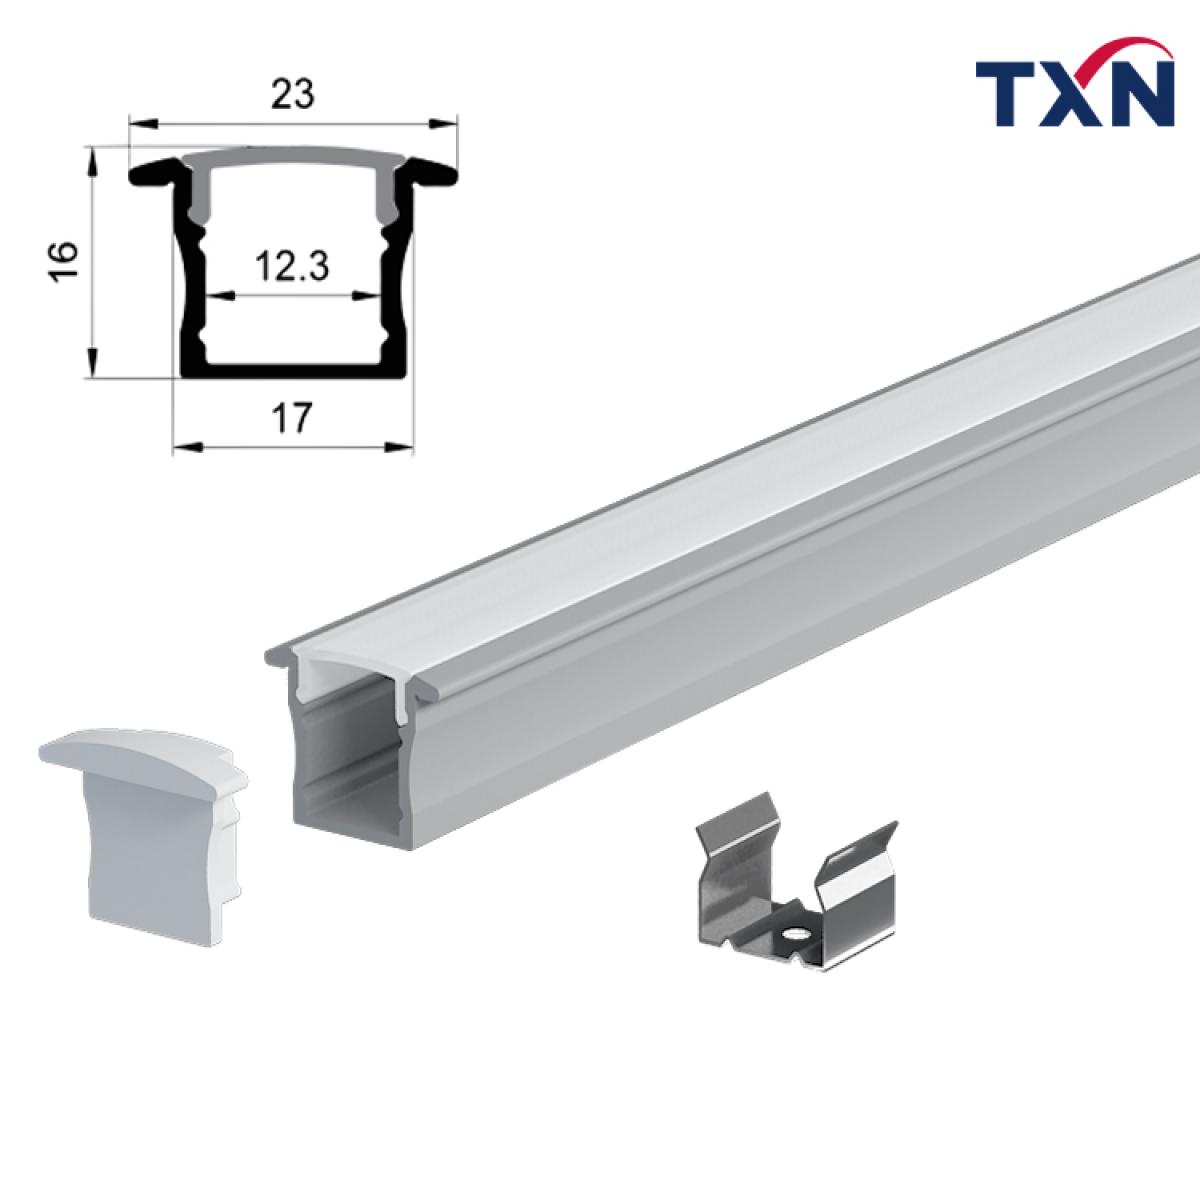 TXN-2316 High Quality Linear Light Recessed Led Channel